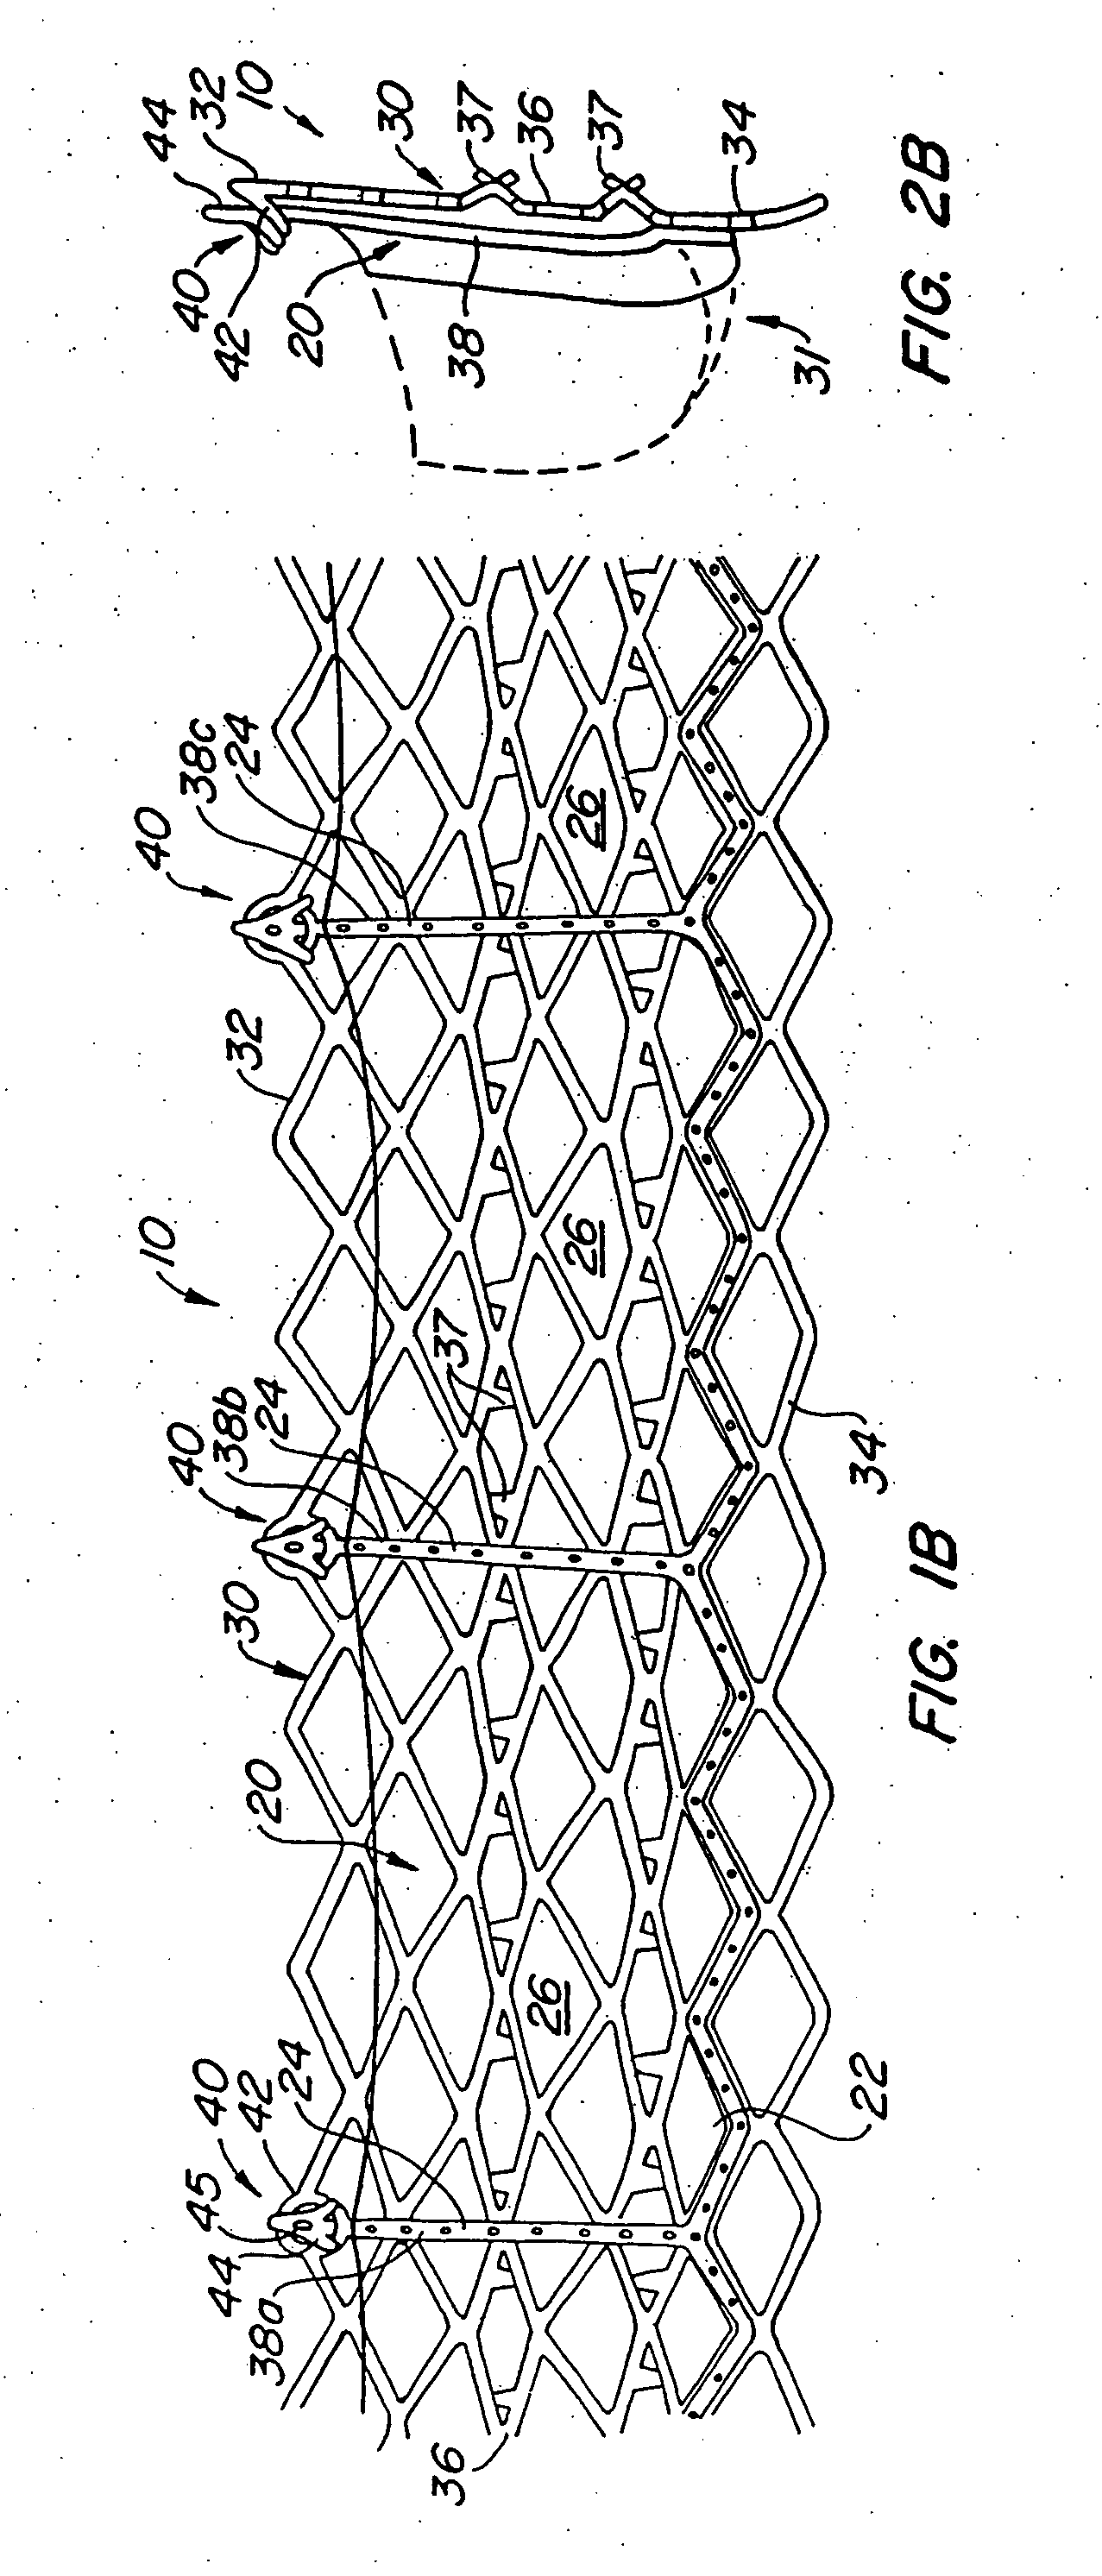 Externally expandable heart valve anchor and method